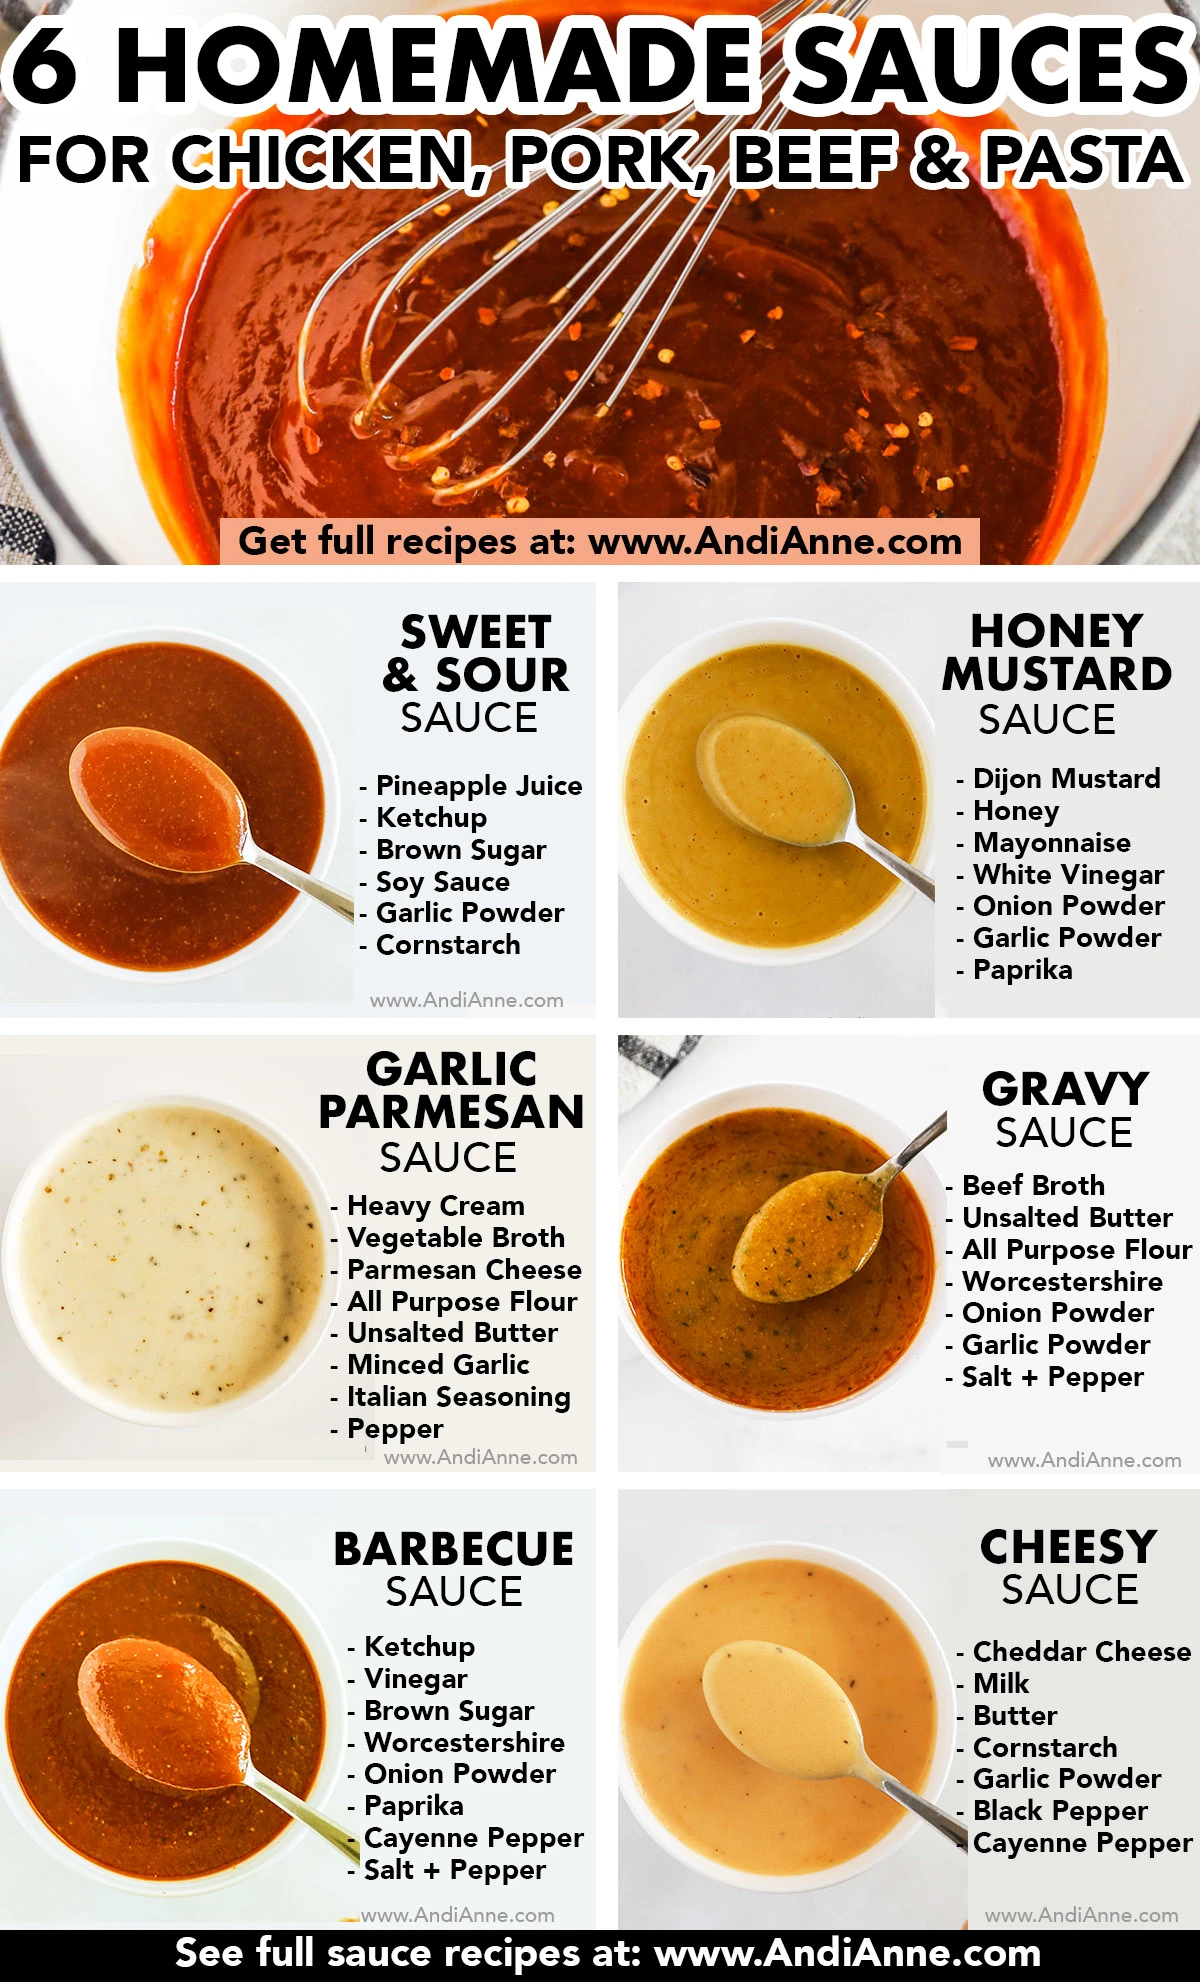 6 homemade sauce for chicken, beef pork and pasta. Sauces include bowls of sweet and sour sauce, honey mustard sauce, garlic parmesan, gravy, barbecue and cheese sauce. Each one lists the ingredients beside the bowl. 